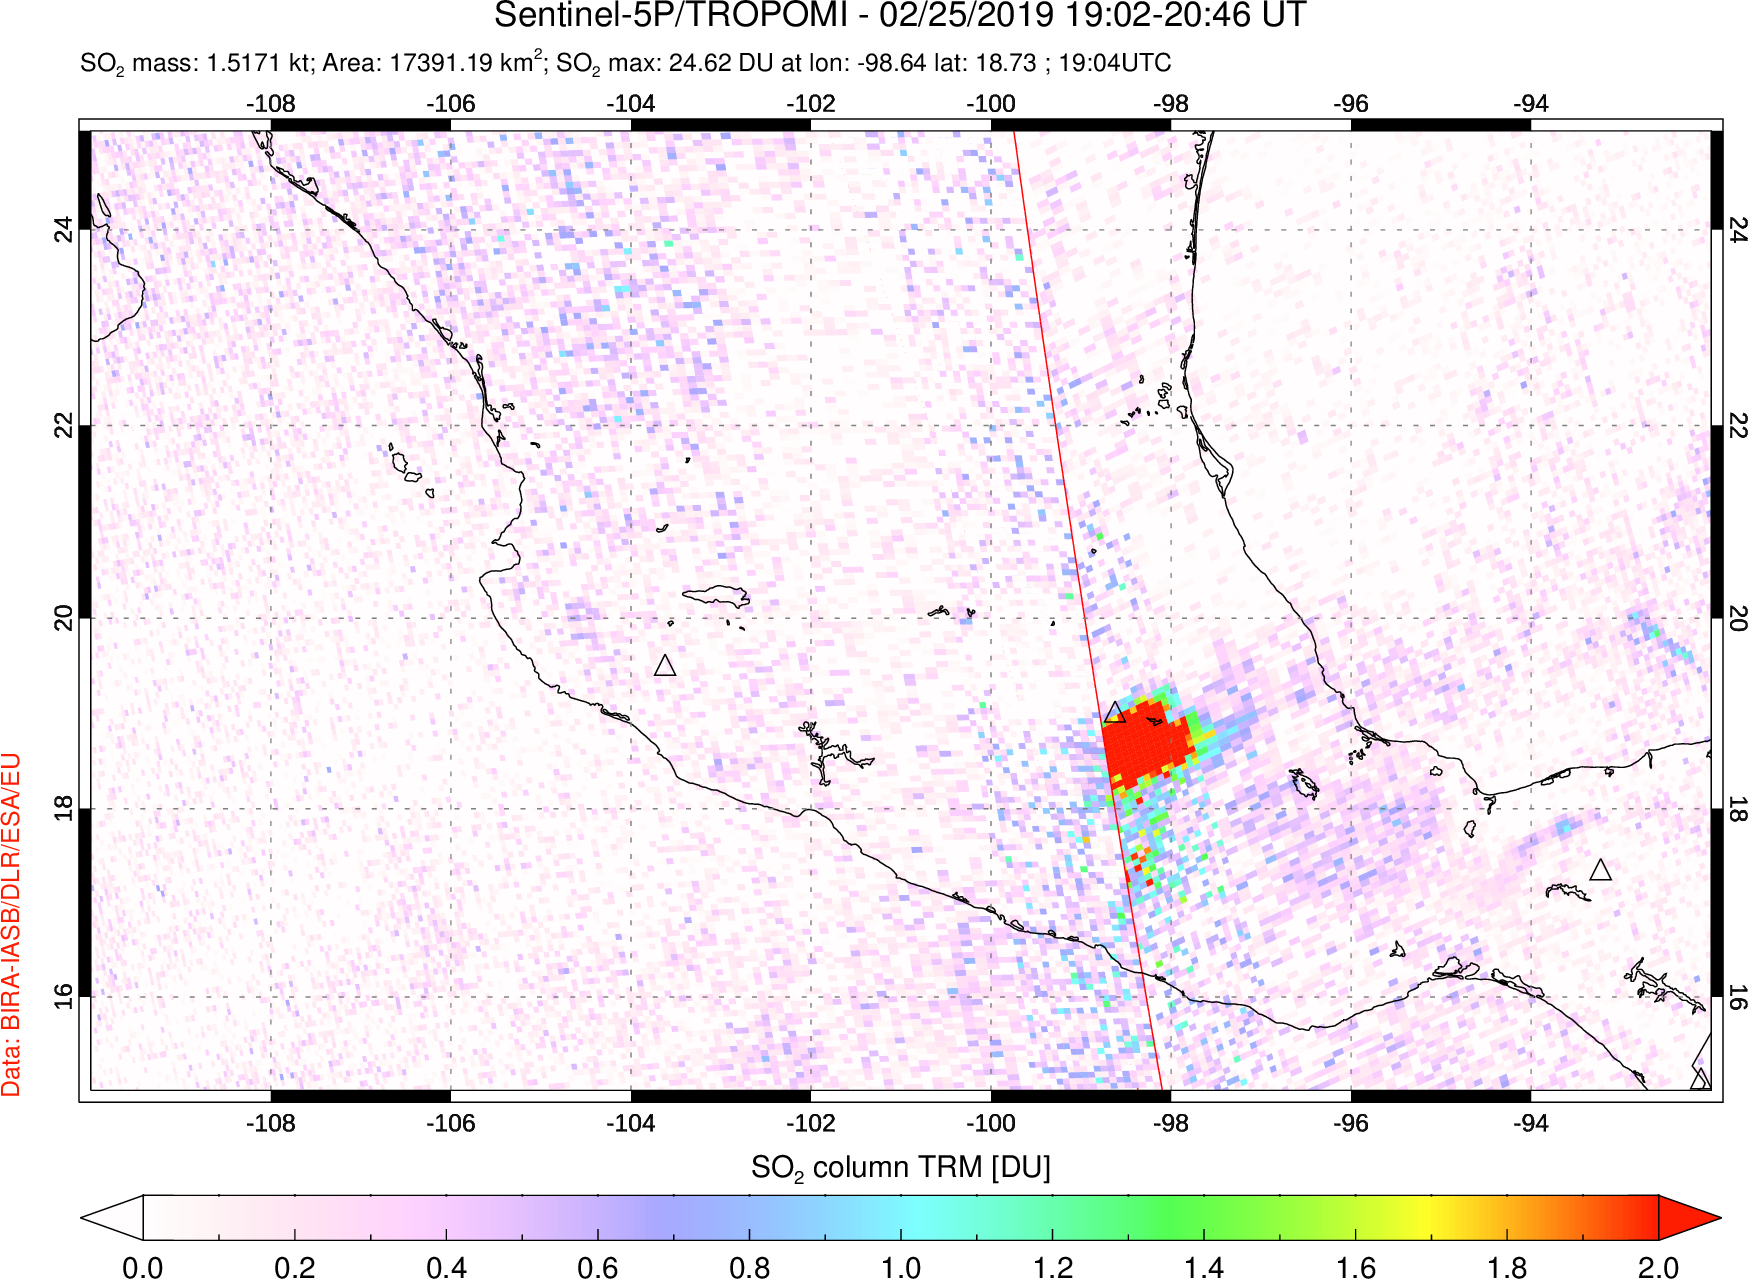 A sulfur dioxide image over Mexico on Feb 25, 2019.